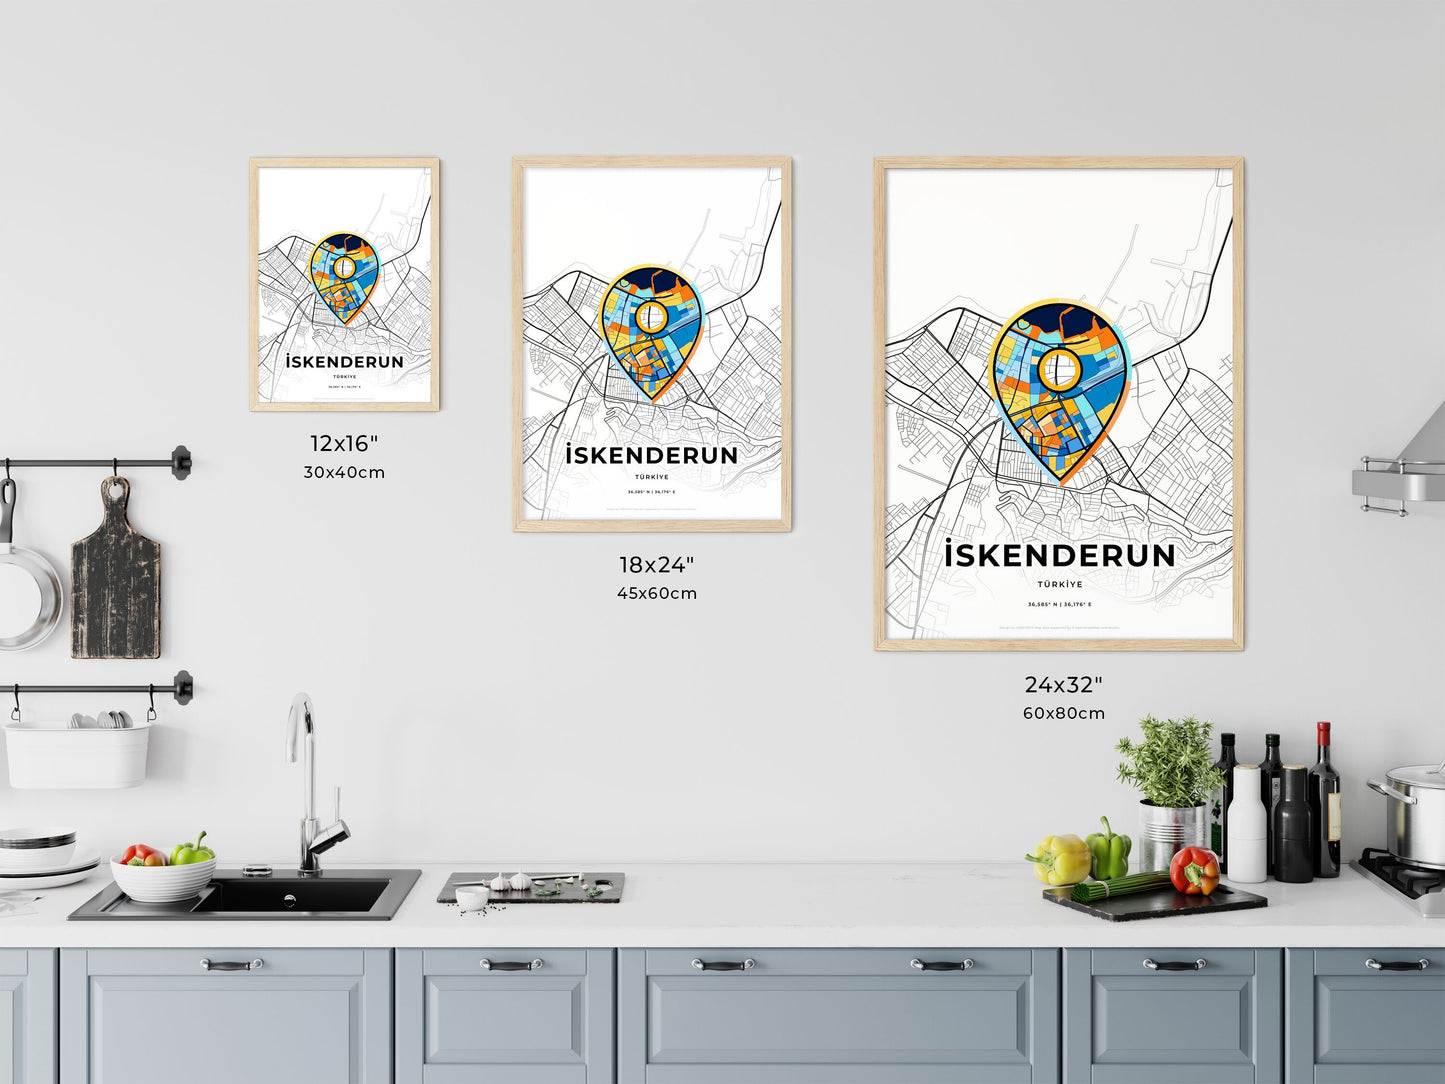 İSKENDERUN TURKEY minimal art map with a colorful icon. Where it all began, Couple map gift.